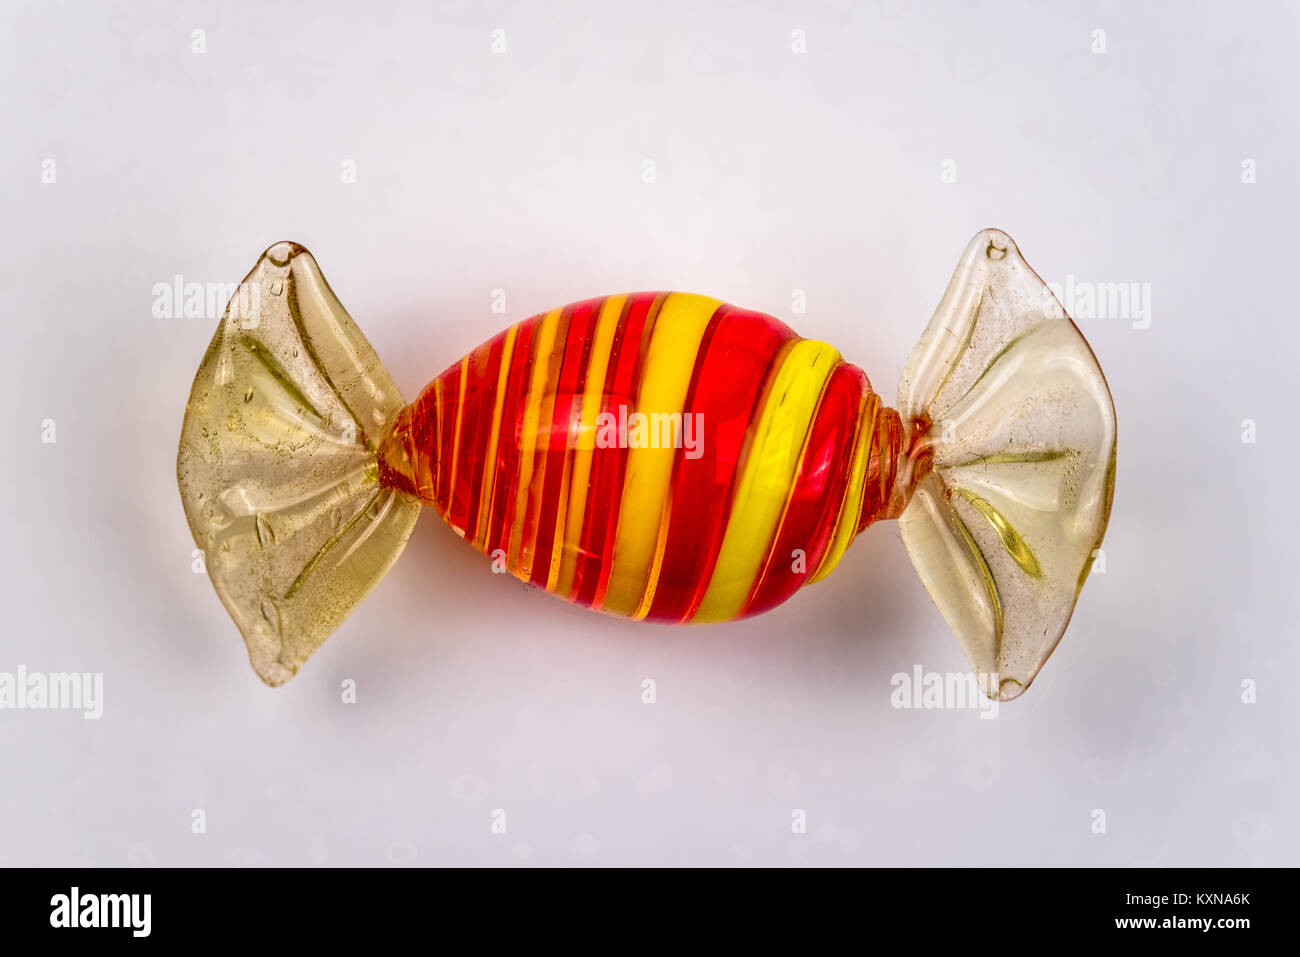 Candy ornament isolated on white background made of glass Stock Photo